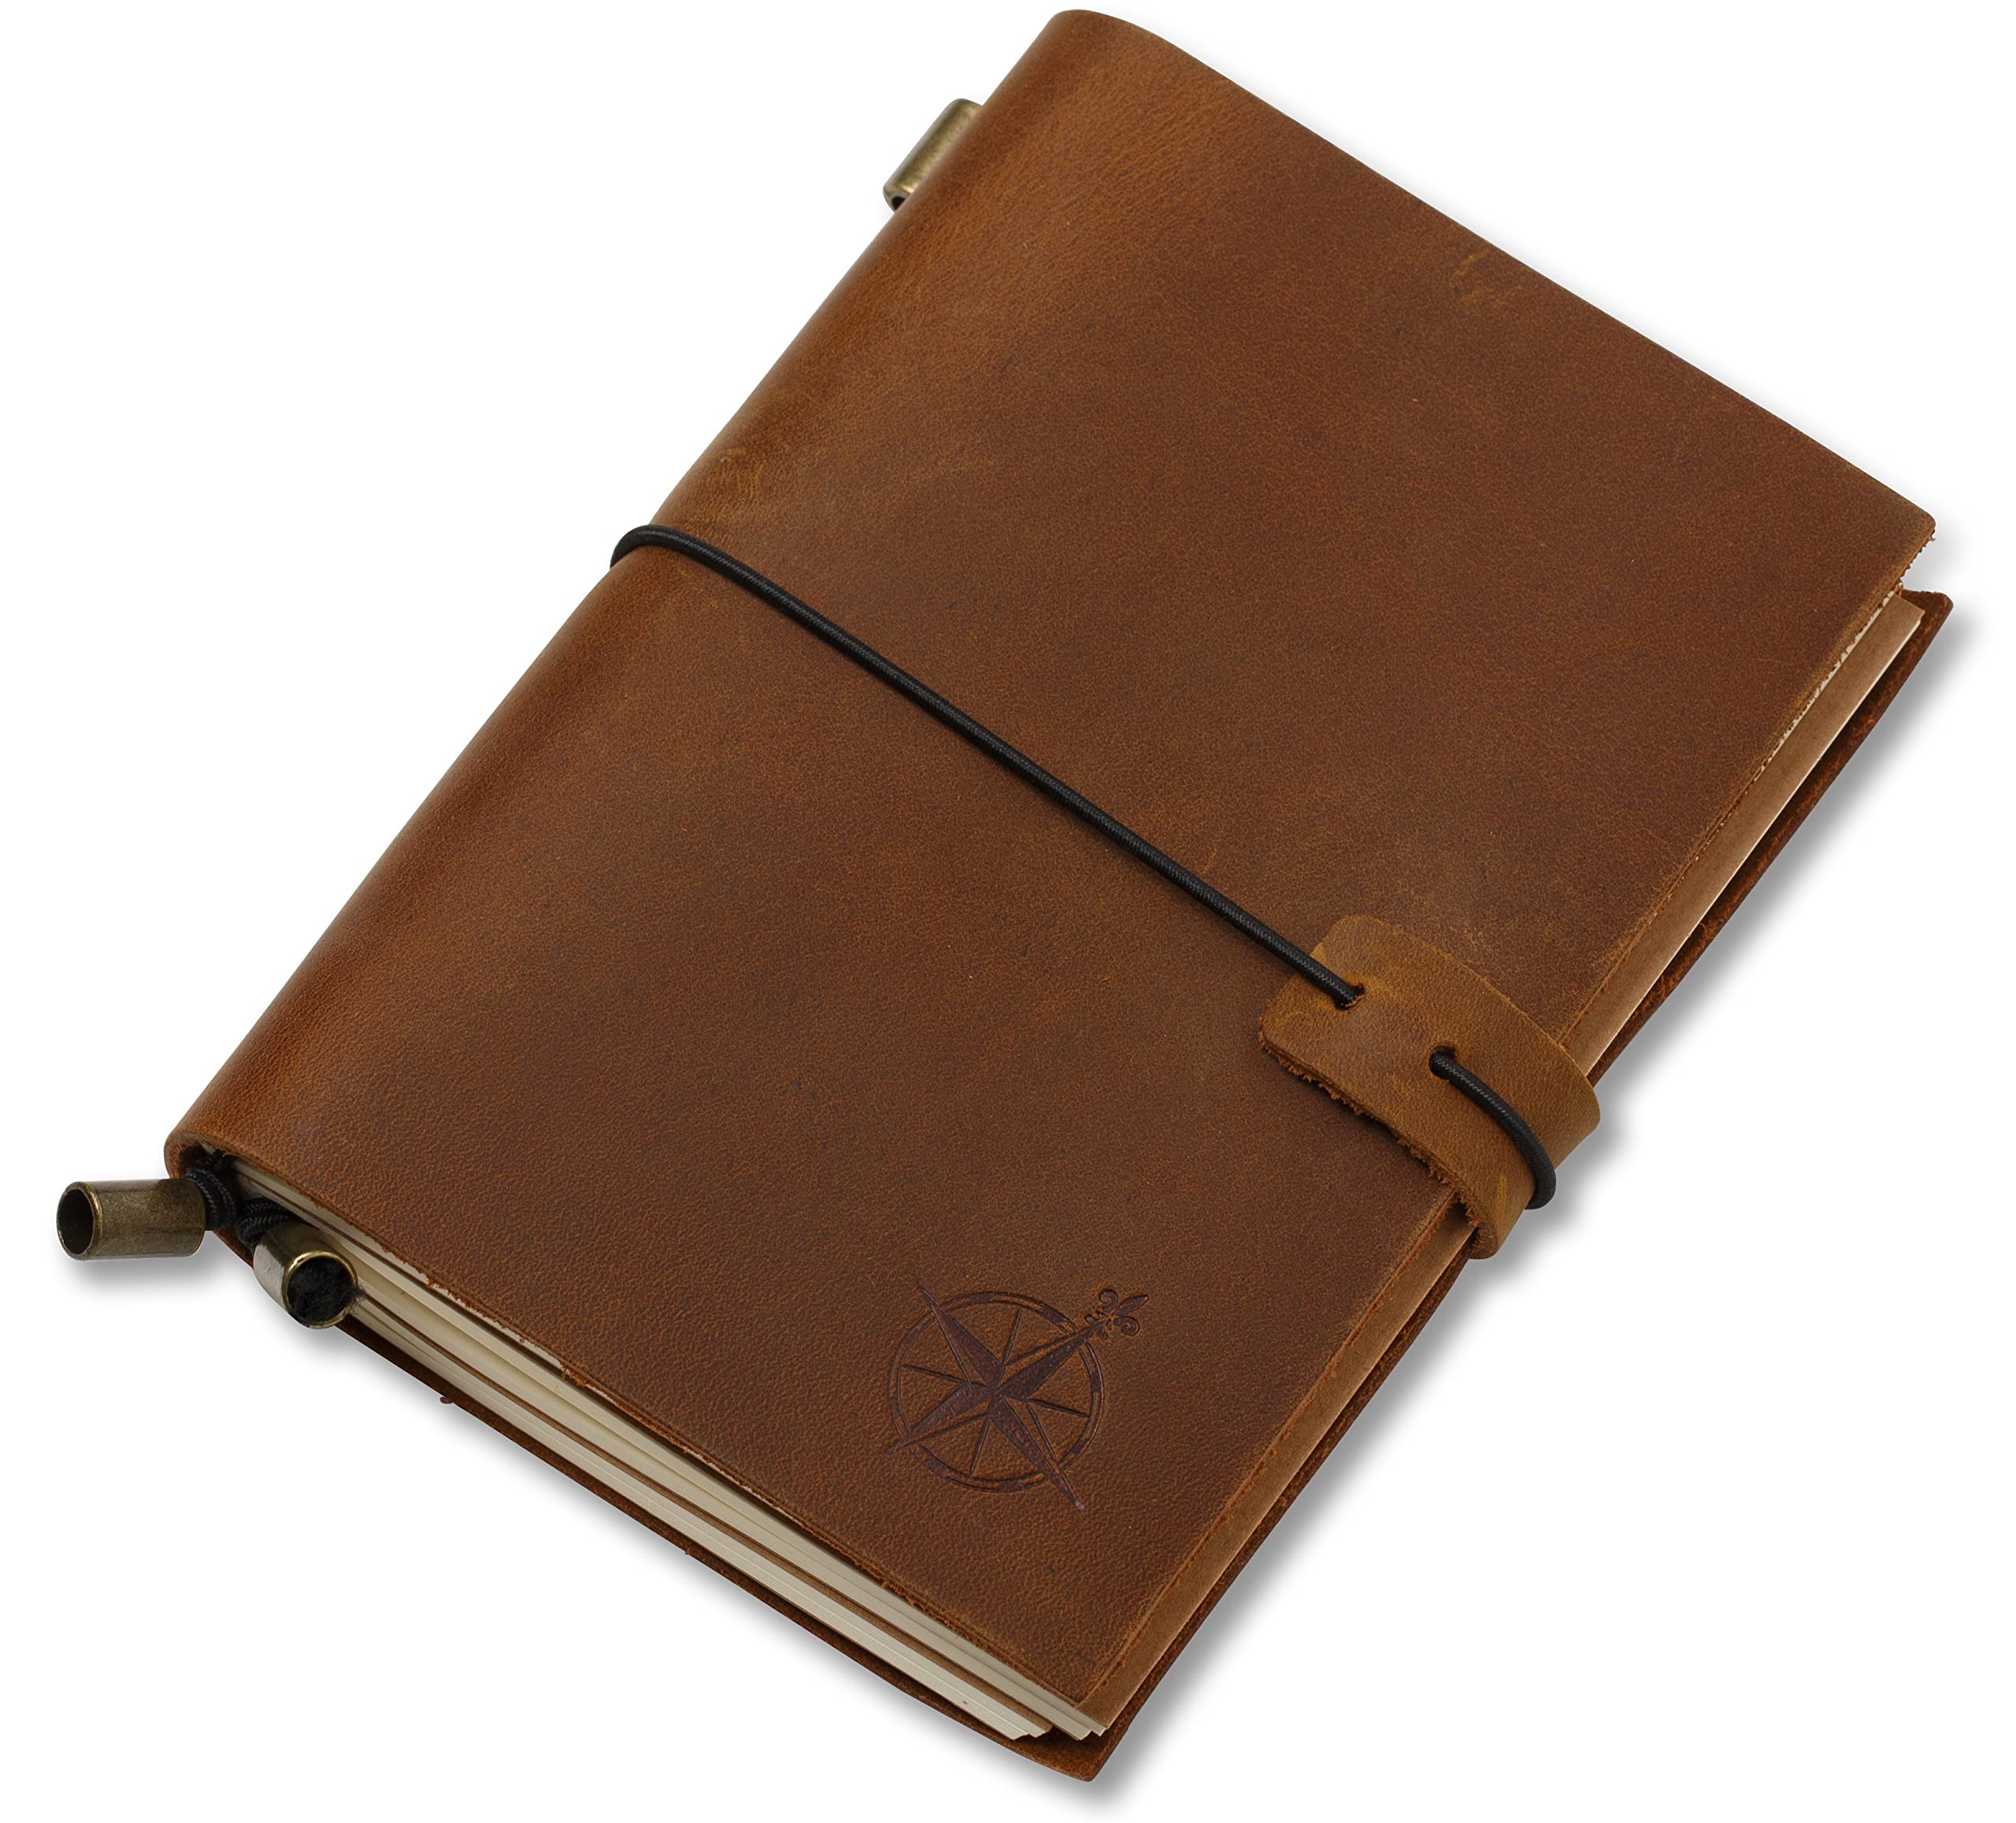 Wanderings A6 Travelers Notebook - Wanderings A6 Refillable Leather Travel Journal, Hand-Crafted Genuine Leather - Perfect For Writing, Poe